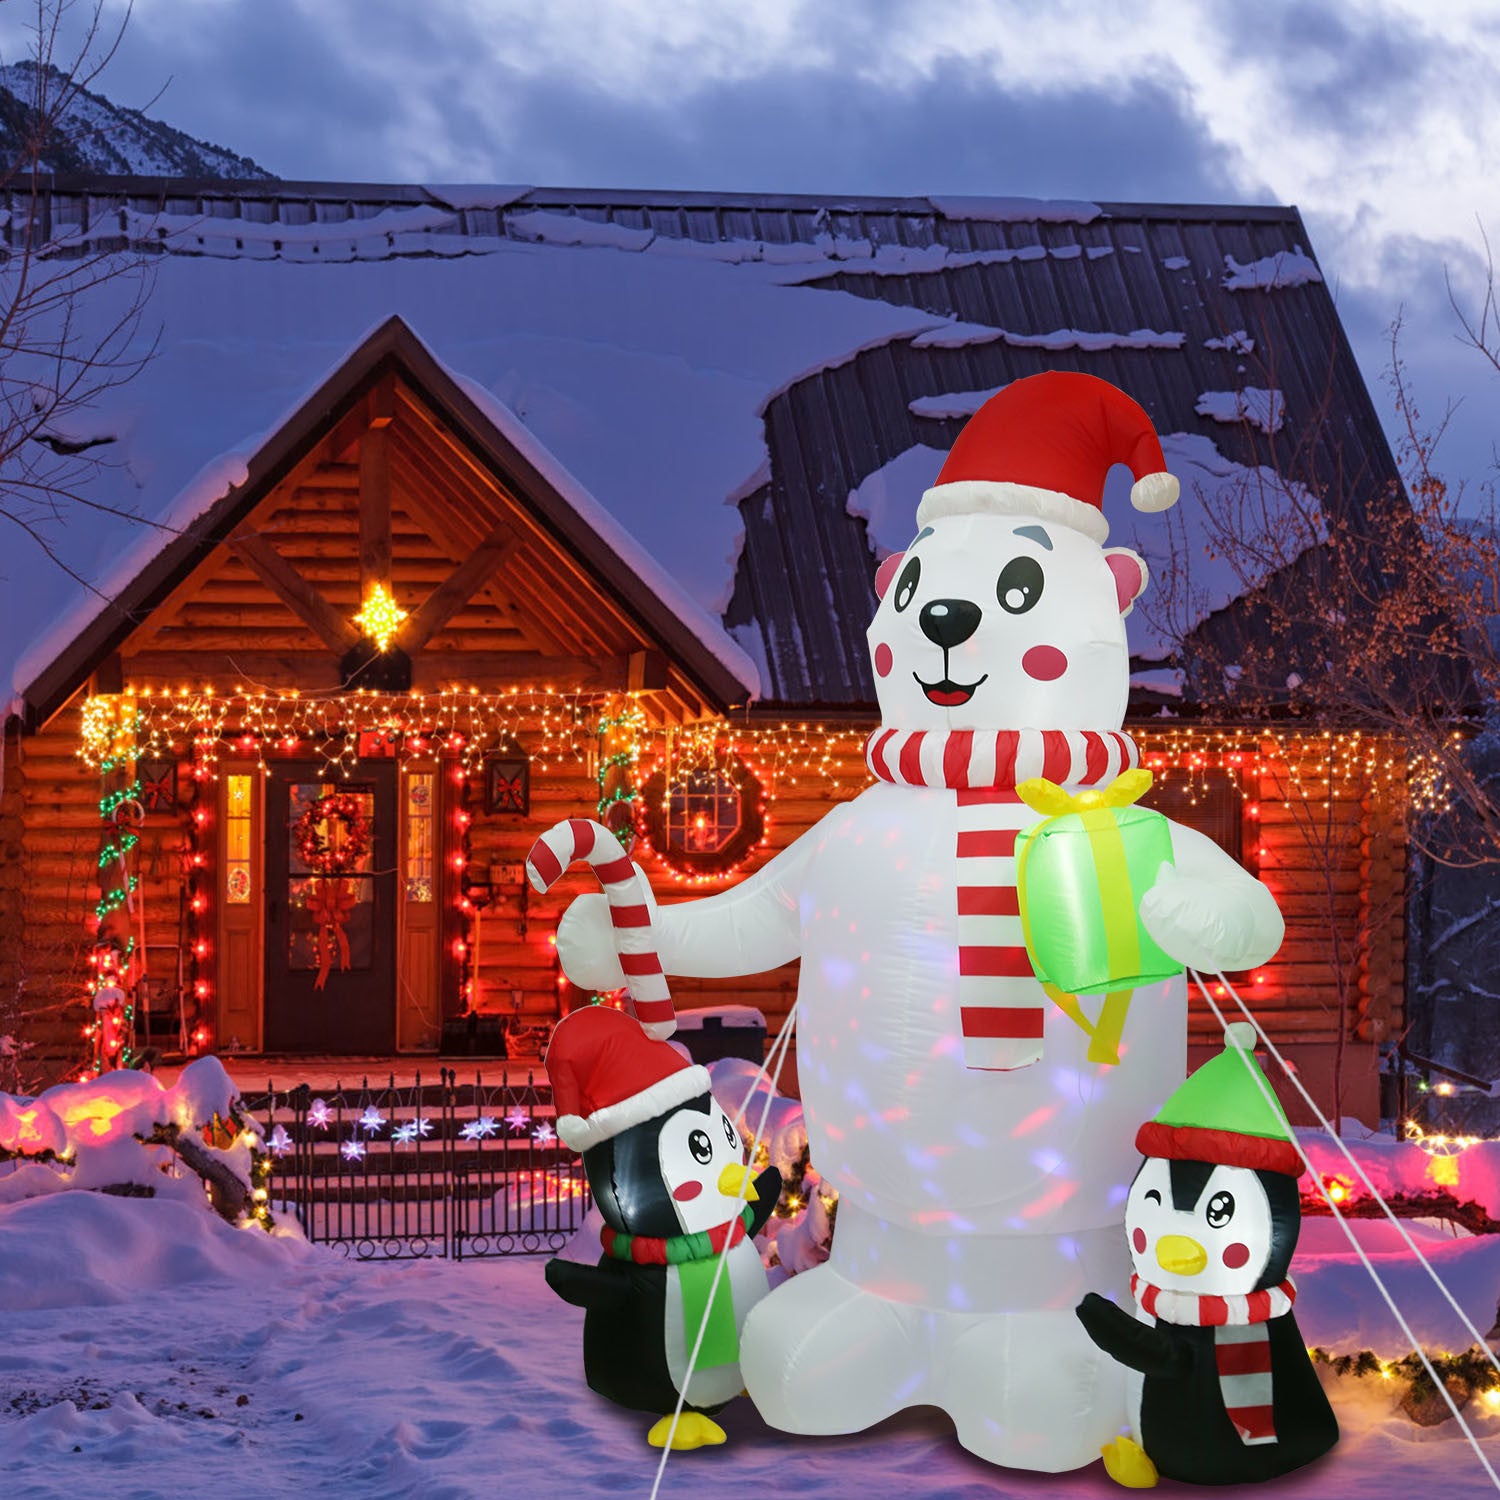 An impressive 5.9FT Christmas Inflatable Outdoor Decoration Polar Bear Gift Box Penguin Blow Up Yard Decoration with LED Light Built-in Air Blower for Winter Holiday Xmas Garden featuring a large inflatable polar bear and penguins in front of a house.